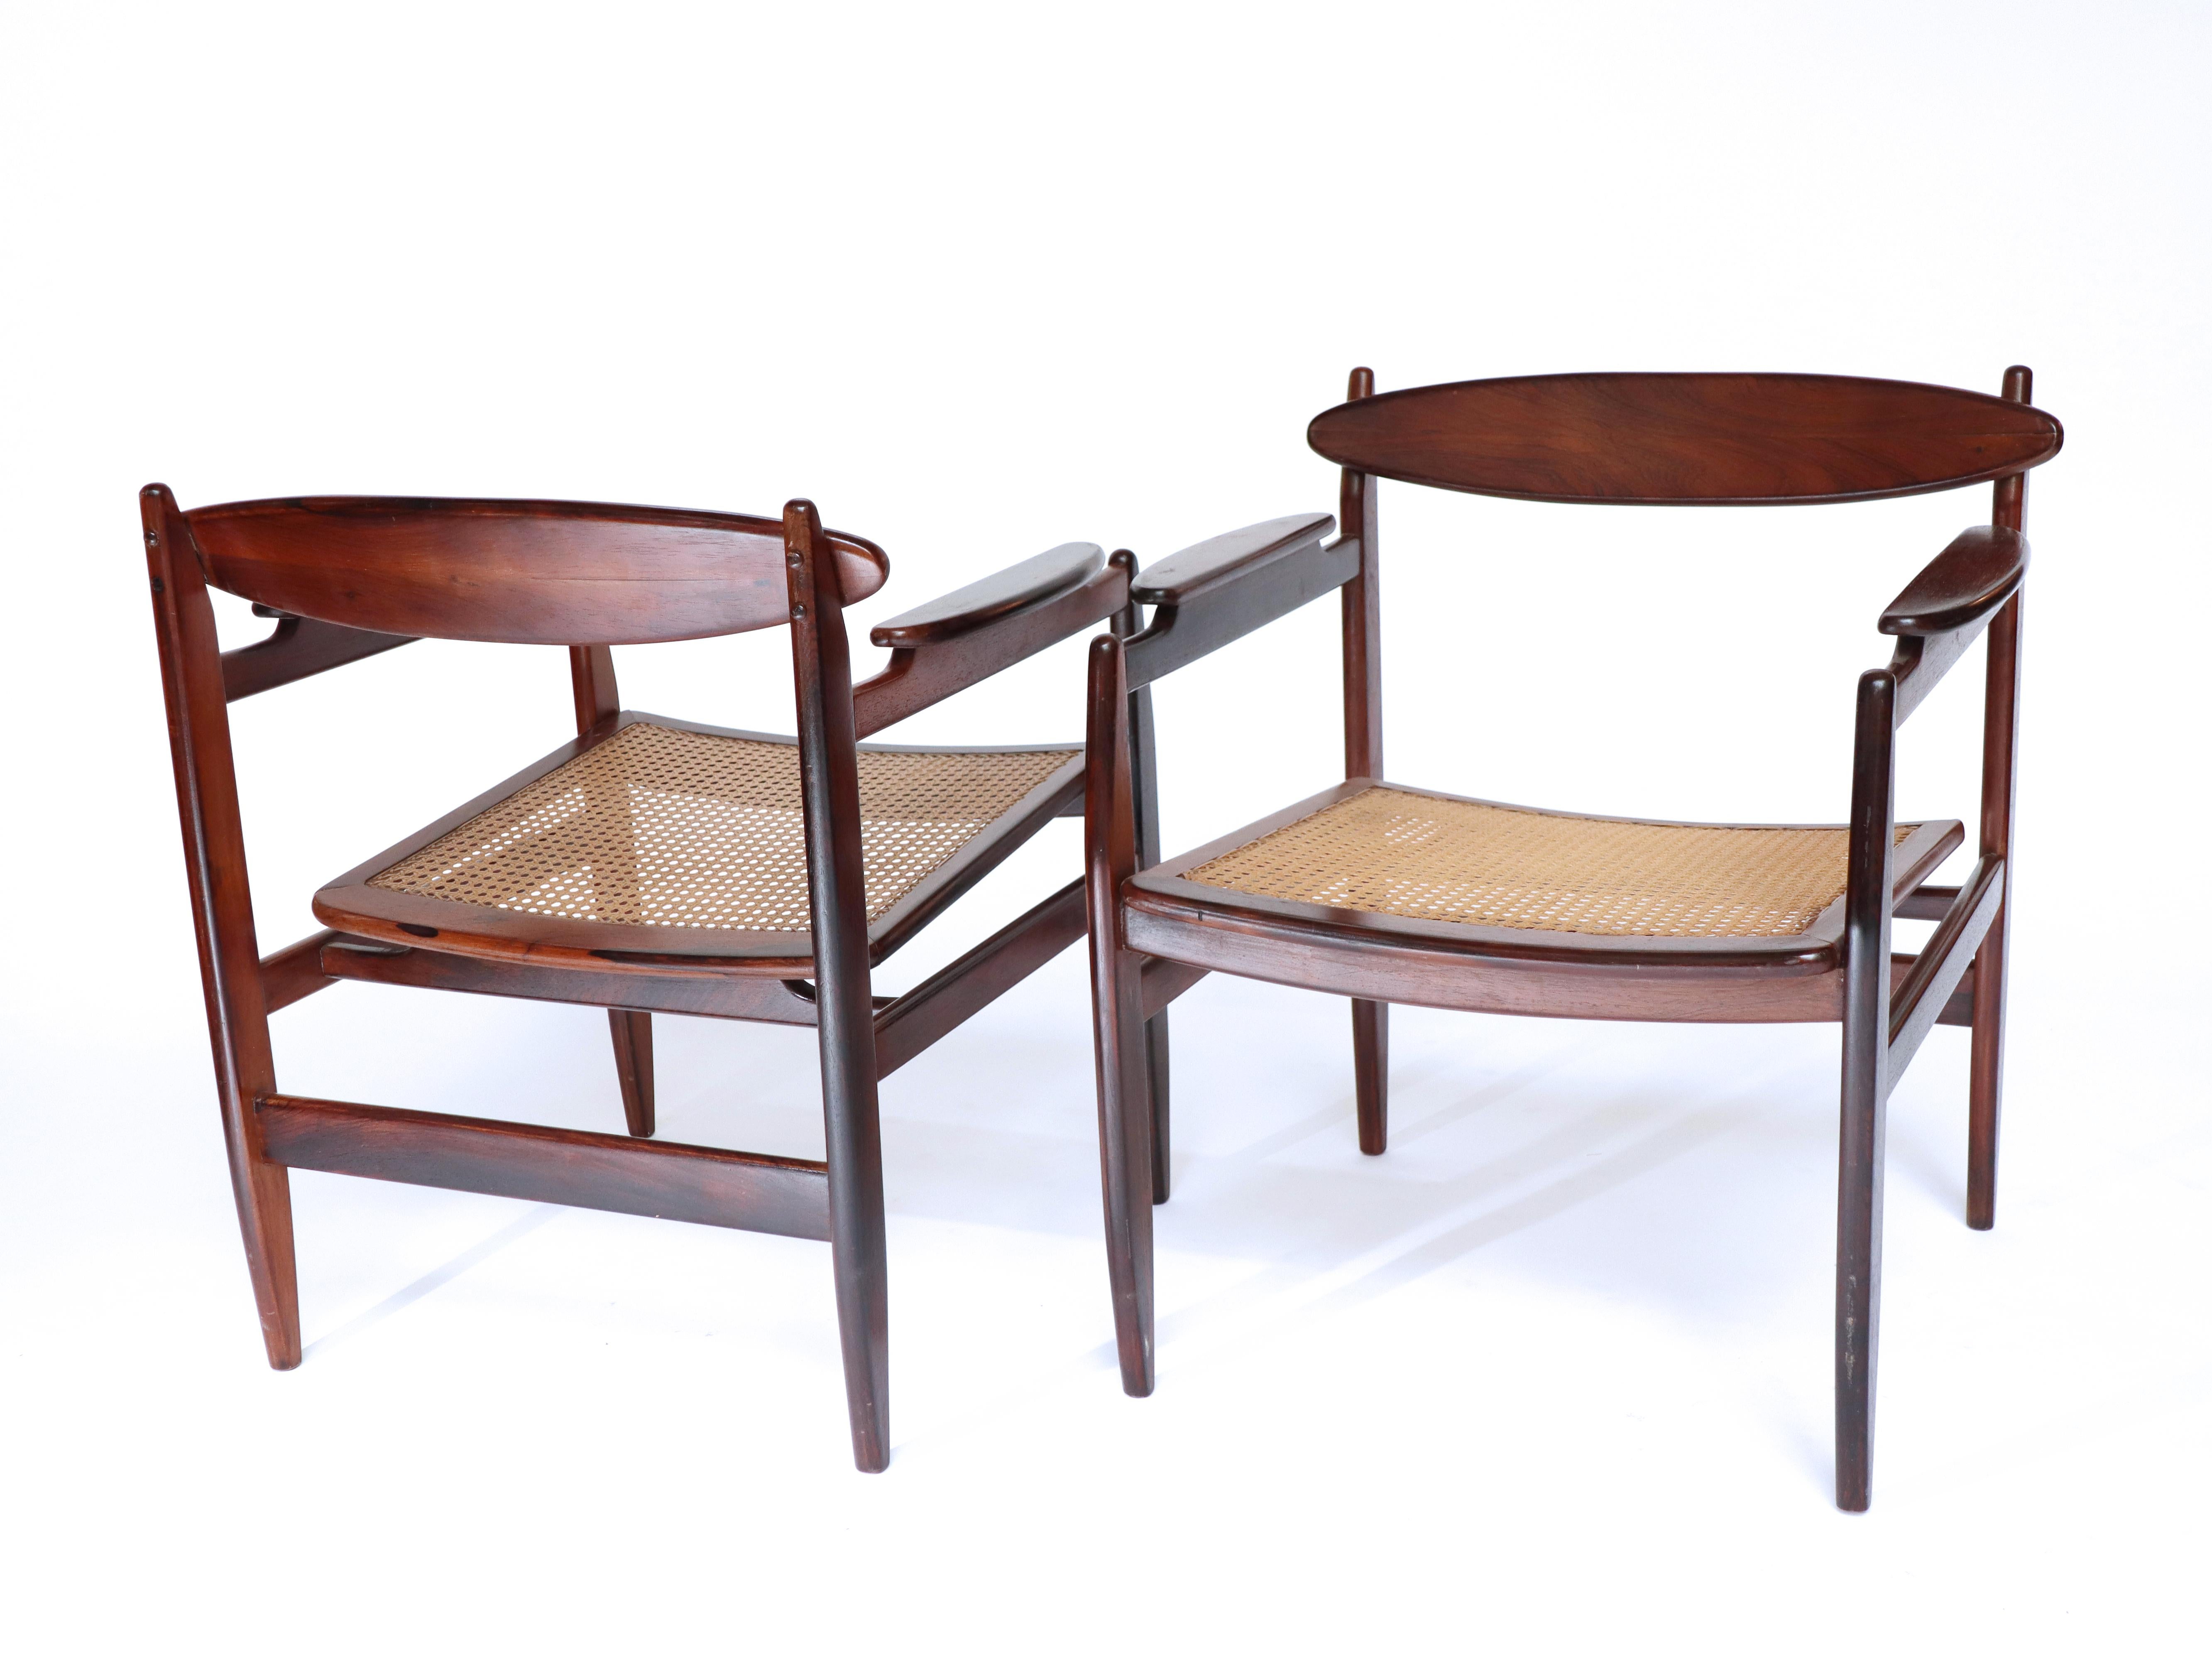 Hand-Crafted Organic Elliptical Pair of Armchairs by Alexandre Rappoport, 1960 For Sale